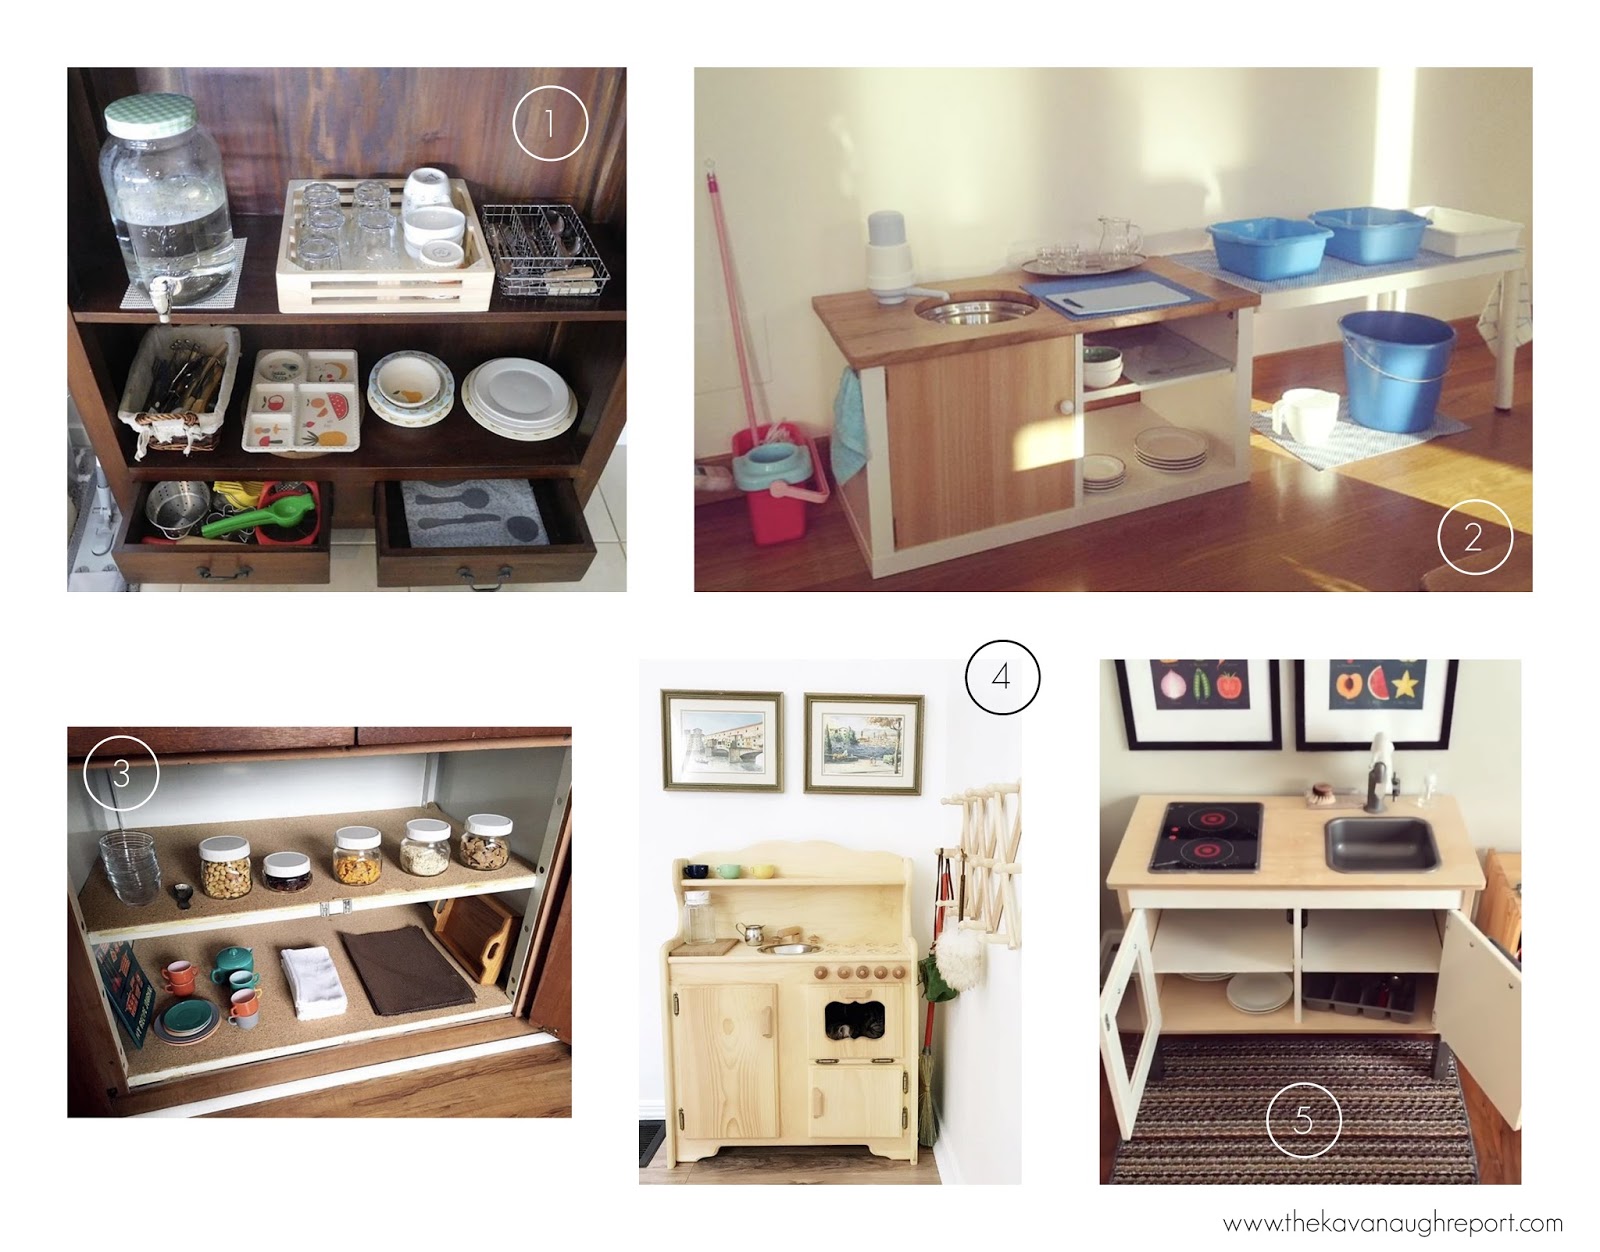 The 4 Best Montessori Kitchens For Play